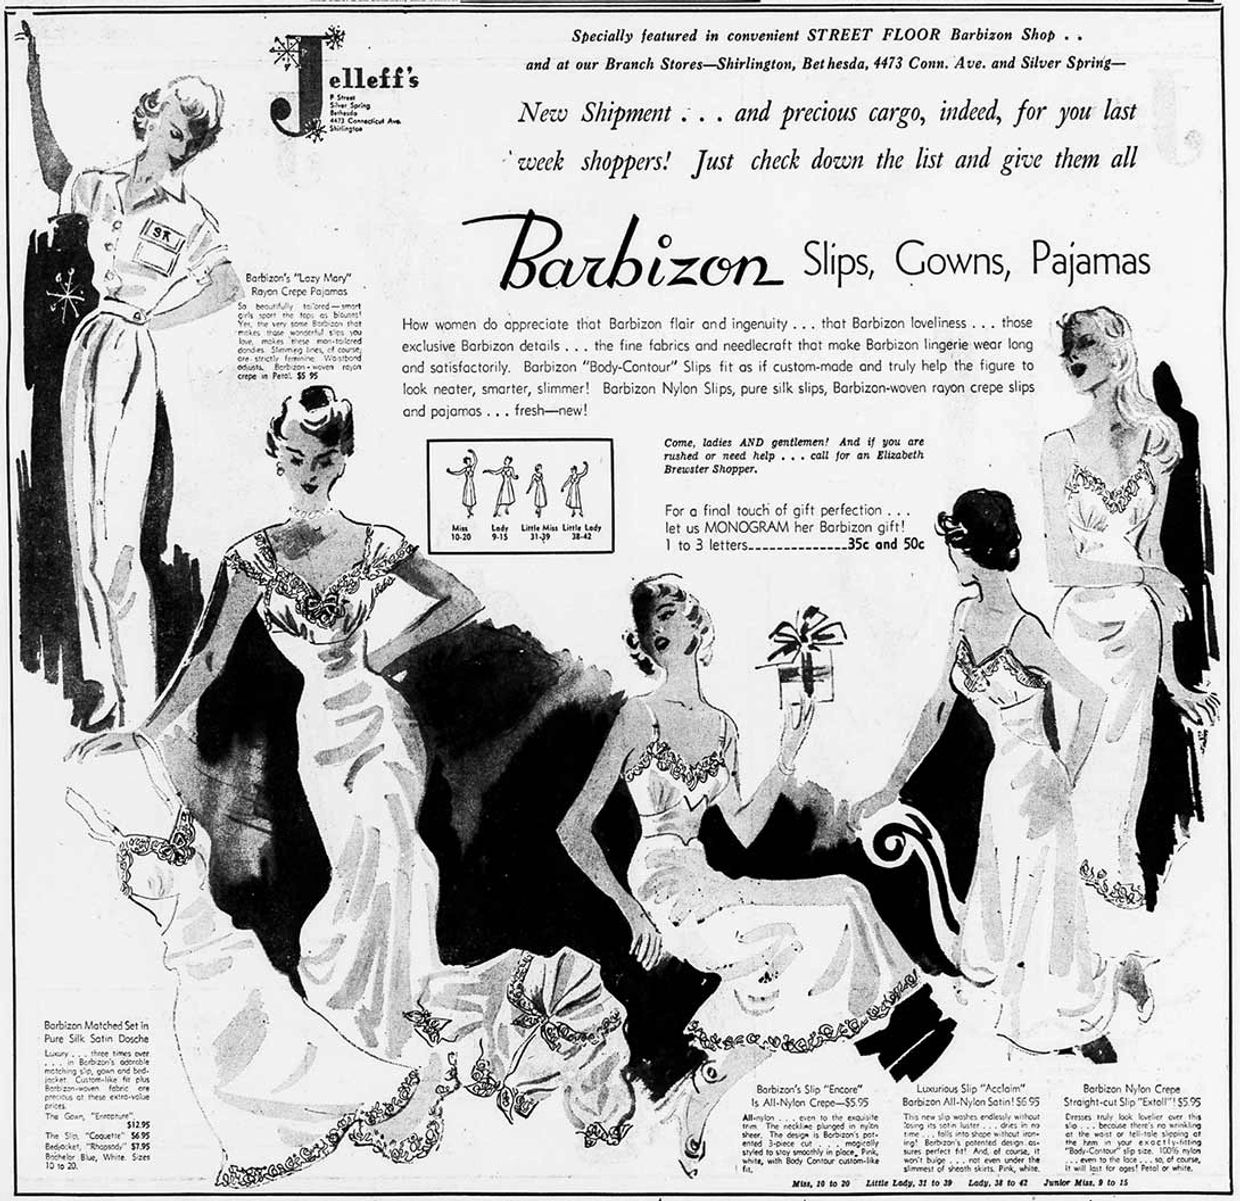 Fashion in the 1940s - a vintage ad for Barbizon slips and nightgowns